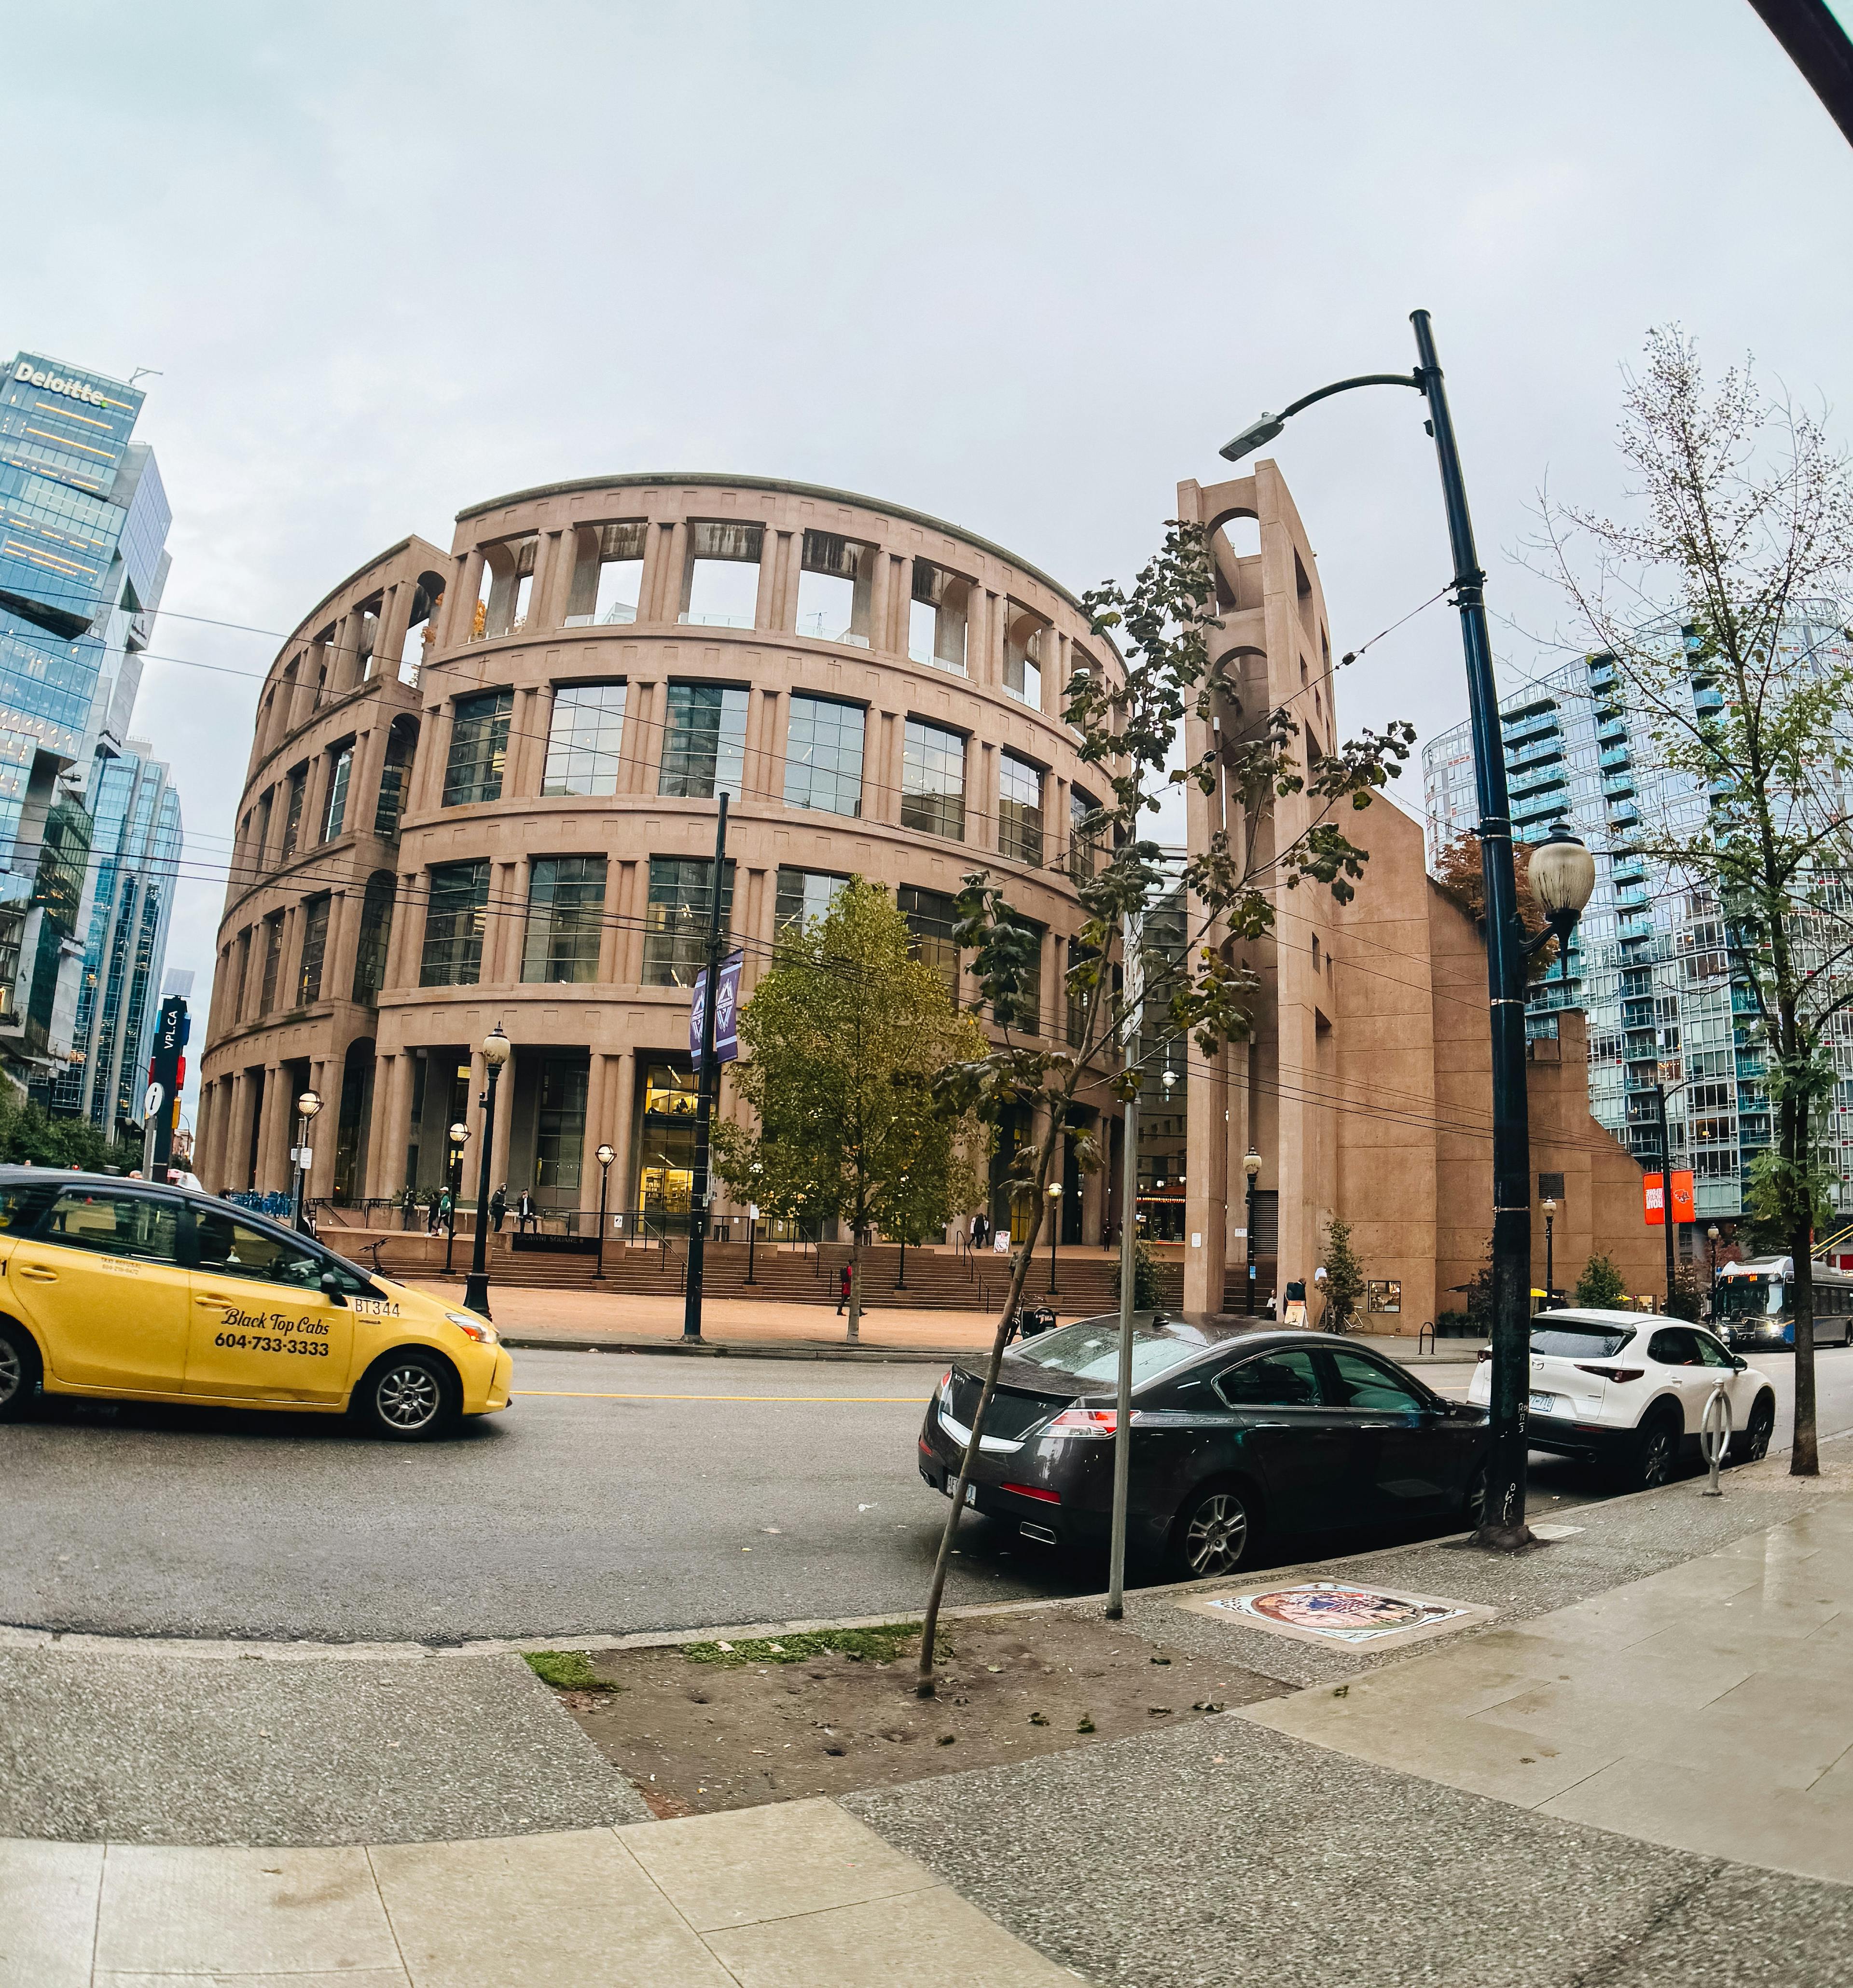 Shot on the Moment 14mm Fisheye Lens with iPhone 15 Pro Max